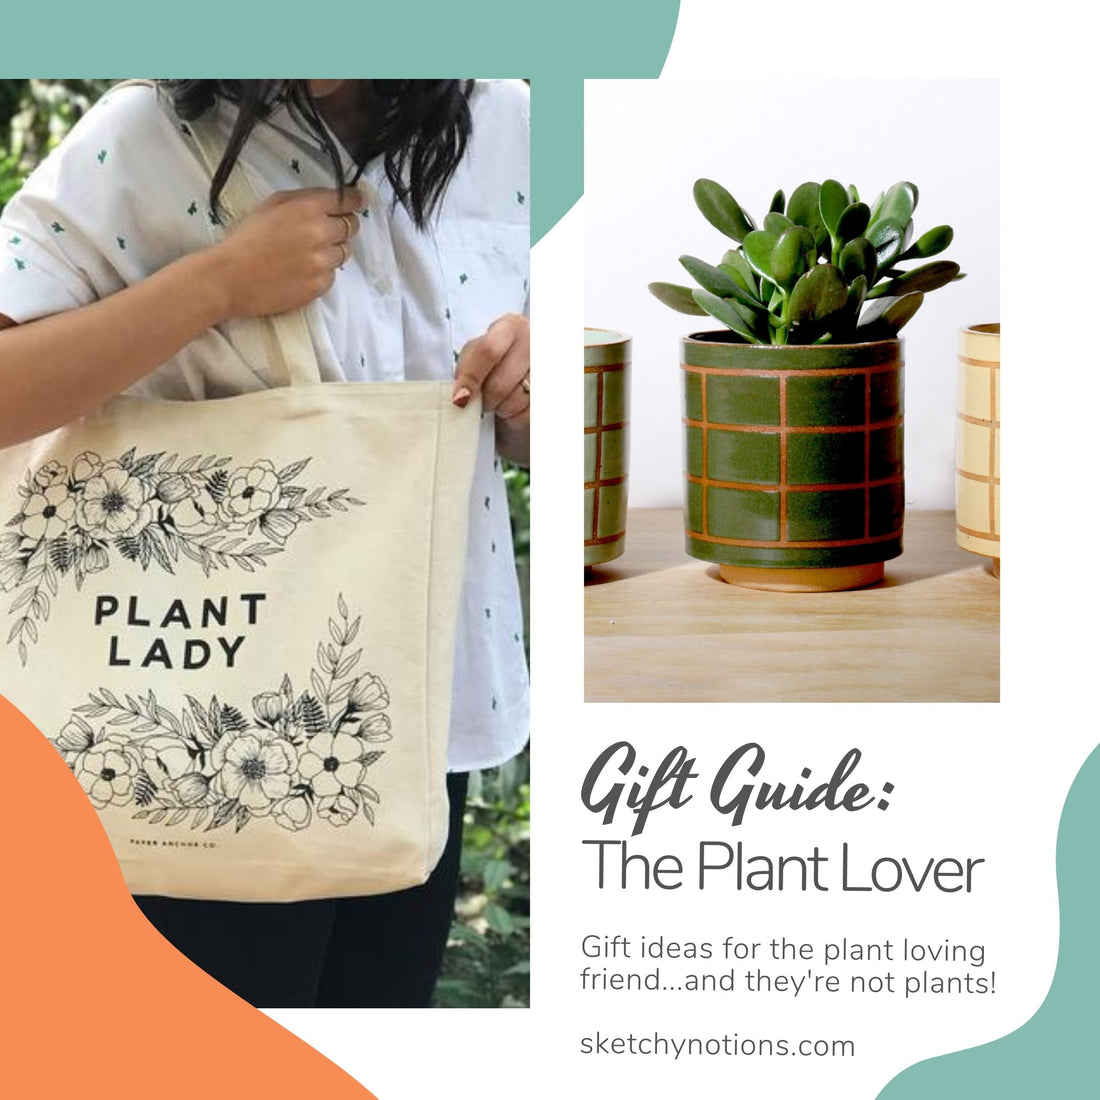 Gift Guide: The Plant Lover